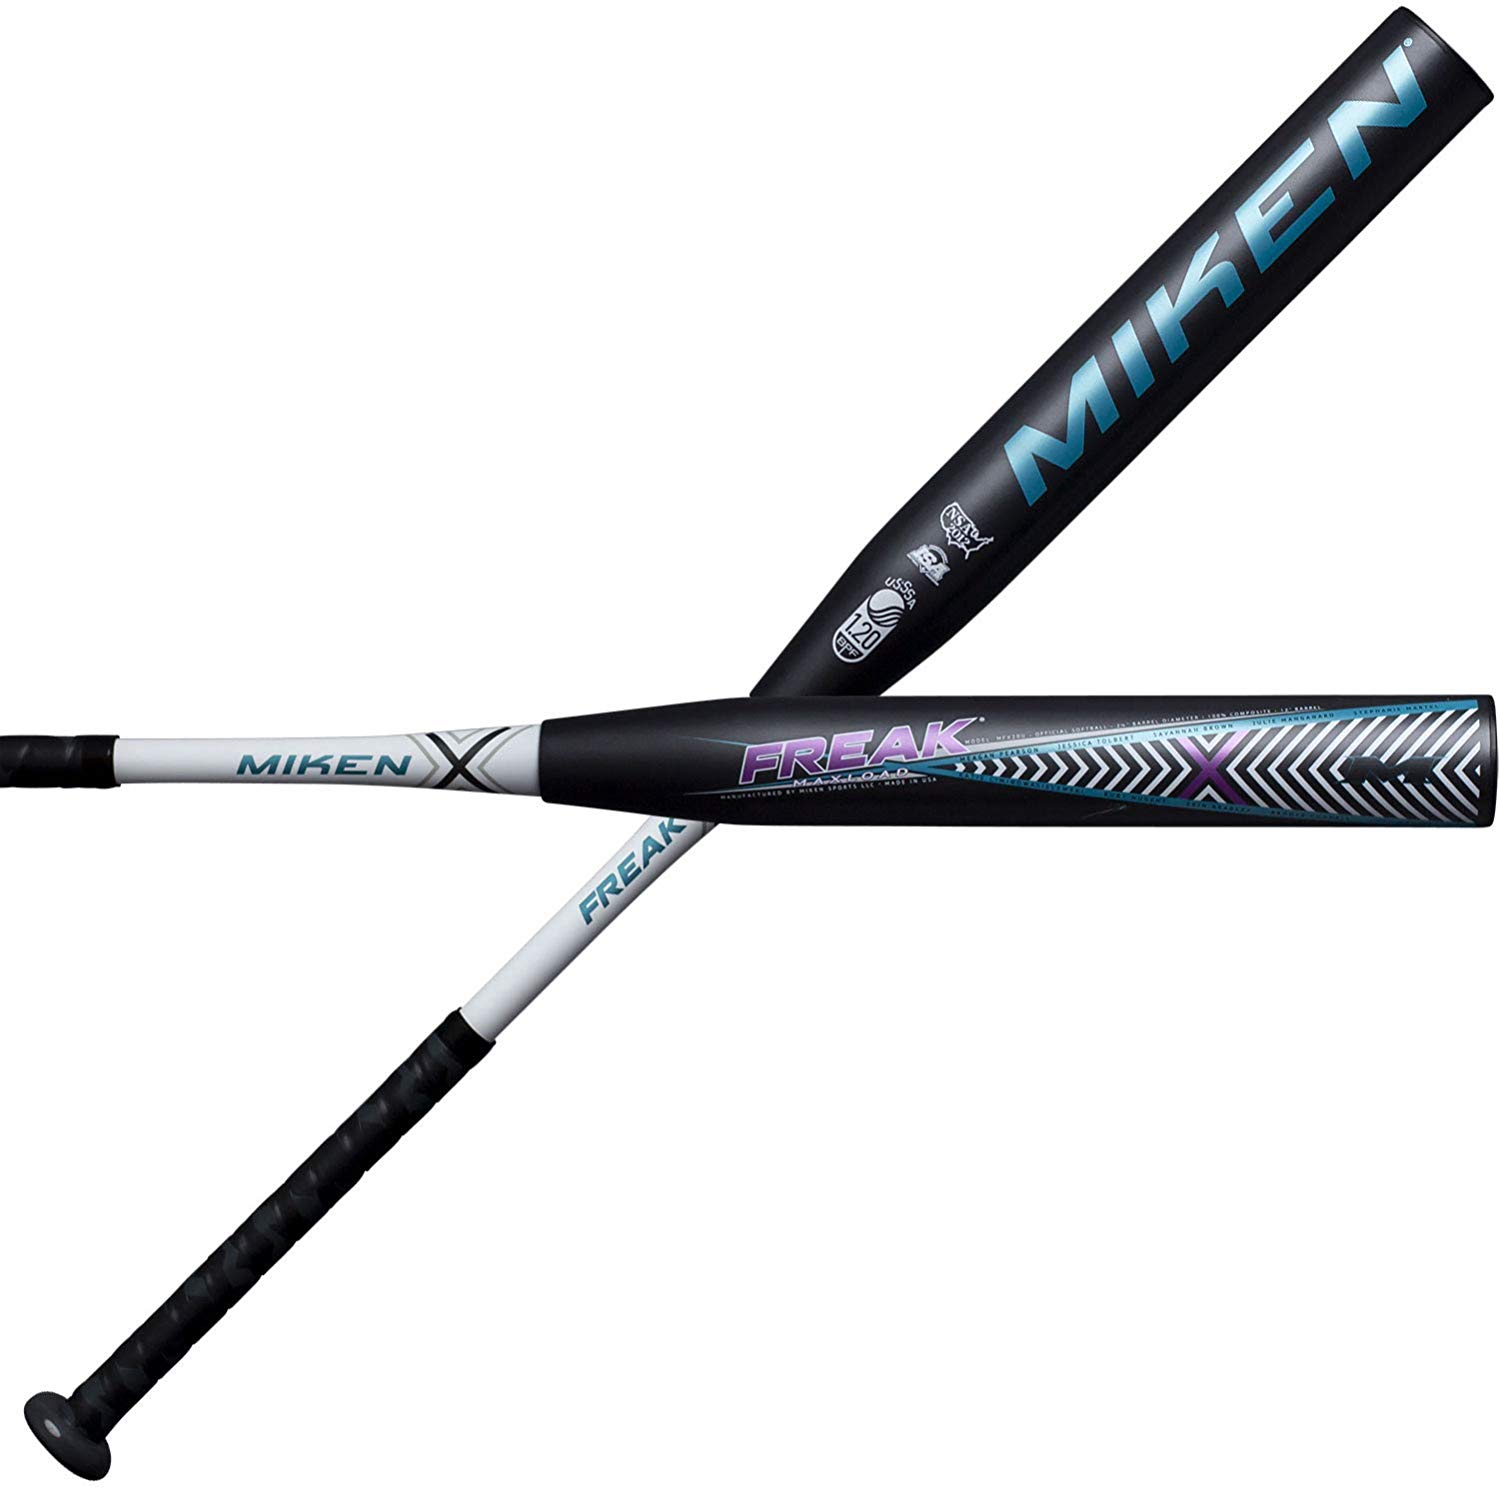 miken-2020-freak-x-maxload-female-usssa-slow-pitch-softball-bat-34-inch-25-oz MFX20U-3-25 Miken 658925043000 EXTENDED SWEET SPOT AND INCREASED FLEX due to 14 inch barrel